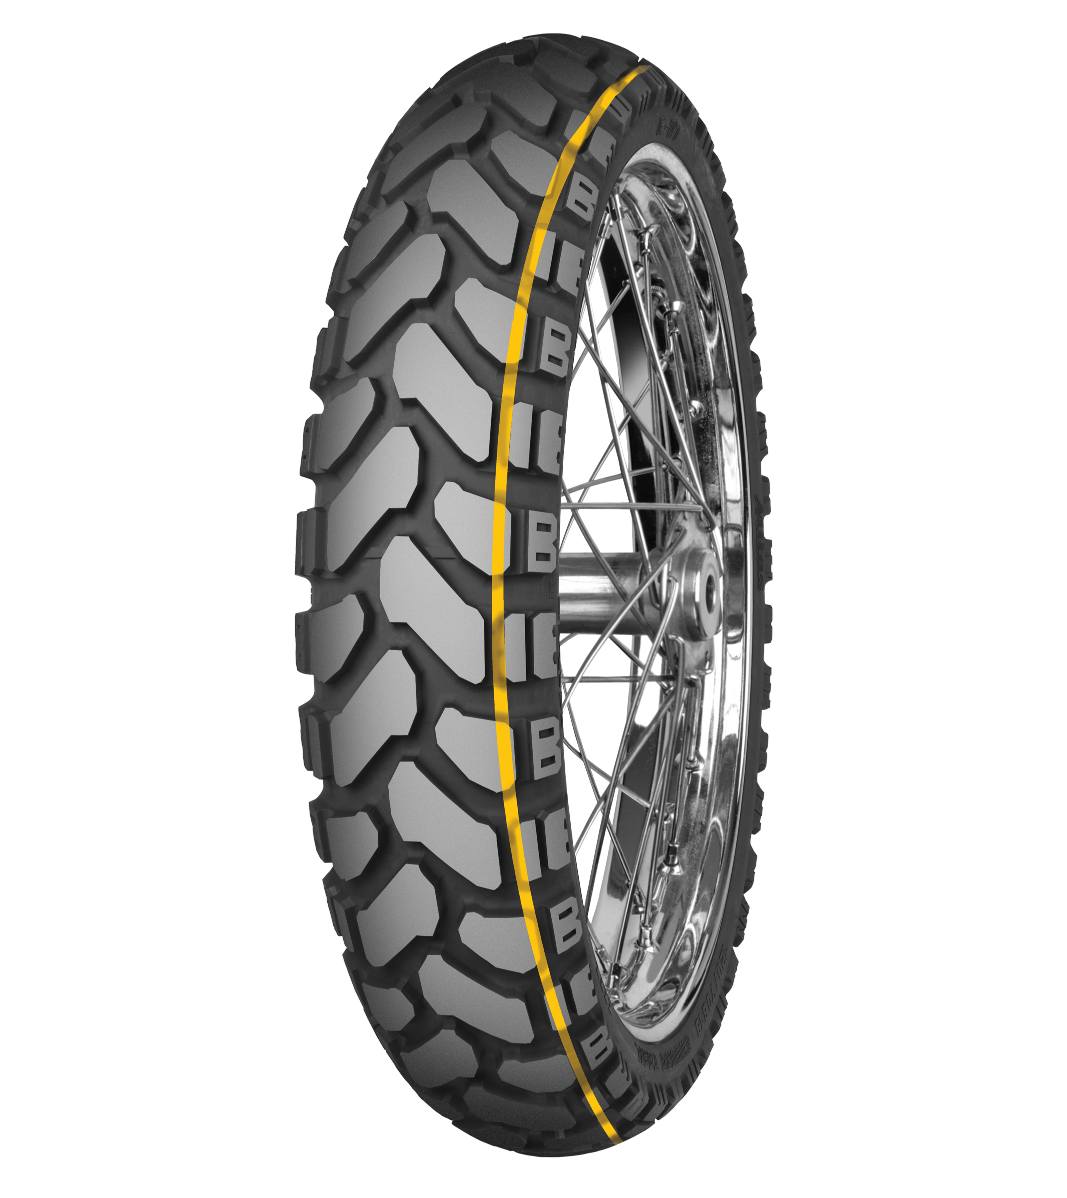 Mitas E-07+ ENDURO TRAIL 110/80B19 Trail ON Trail DAKAR 59T Yellow Tubeless Front Tire, 224448, 110/80B19, Adventure Touring, E Series, E-07+ Enduro Trail, Front, Trail, Trail ON, Tires - Imported and distributed in North & South America by Lindeco Genuine Powersports - Premier Powersports Equipment and Accessories for Motorcycle Enthusiasts, Professional Riders and Dealers.